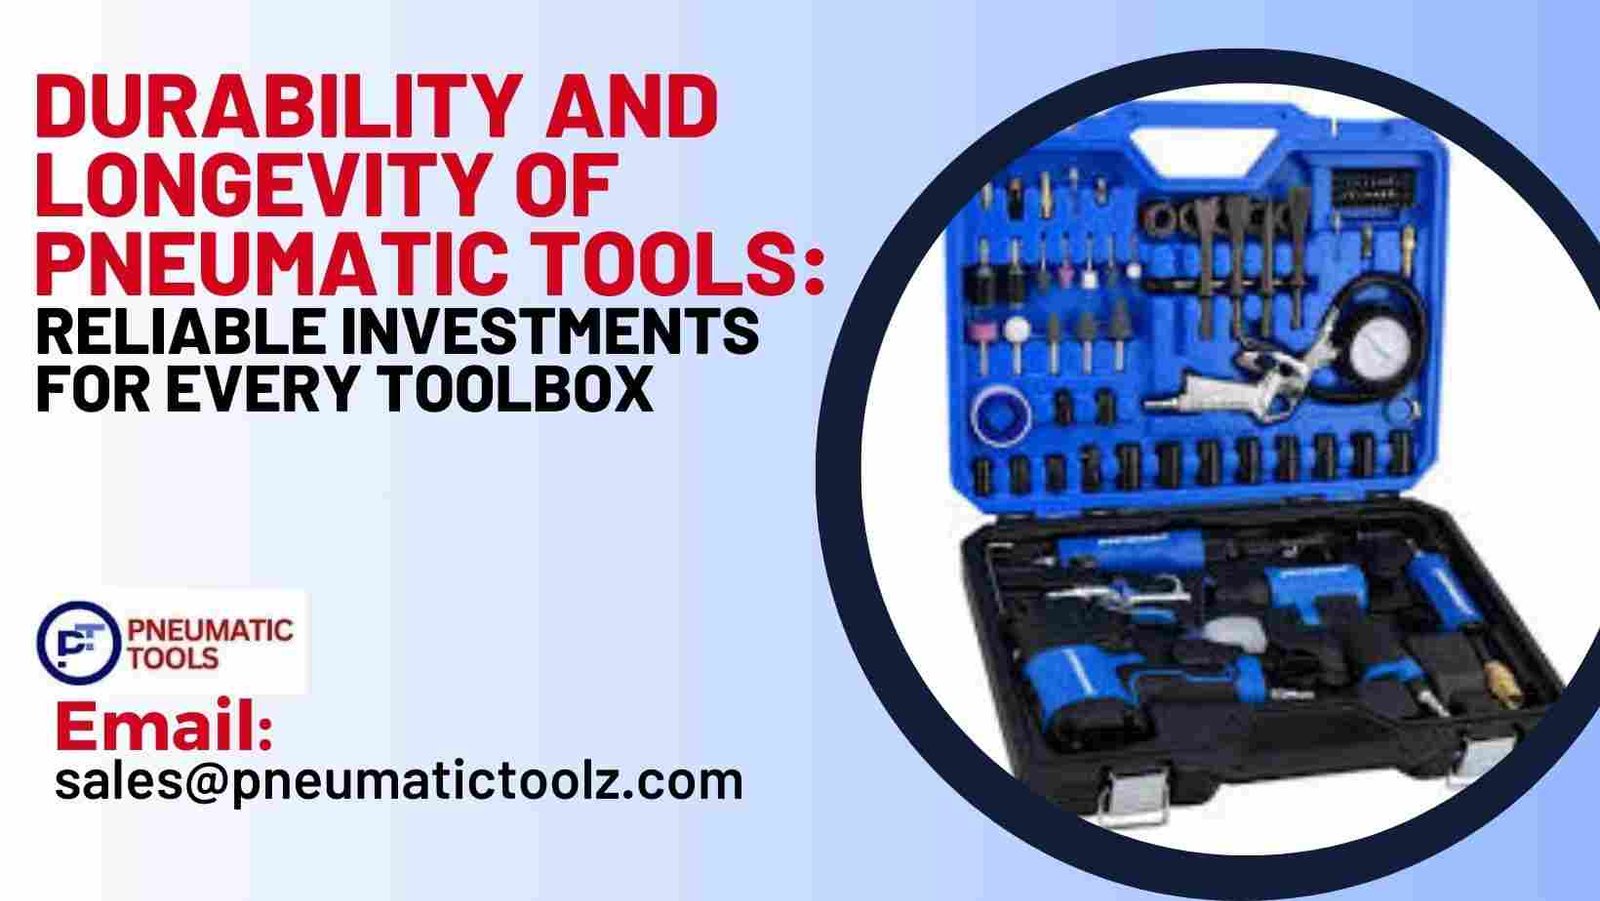 Durability and Longevity of Pneumatic Tools: Reliable Investments for Every Toolbox